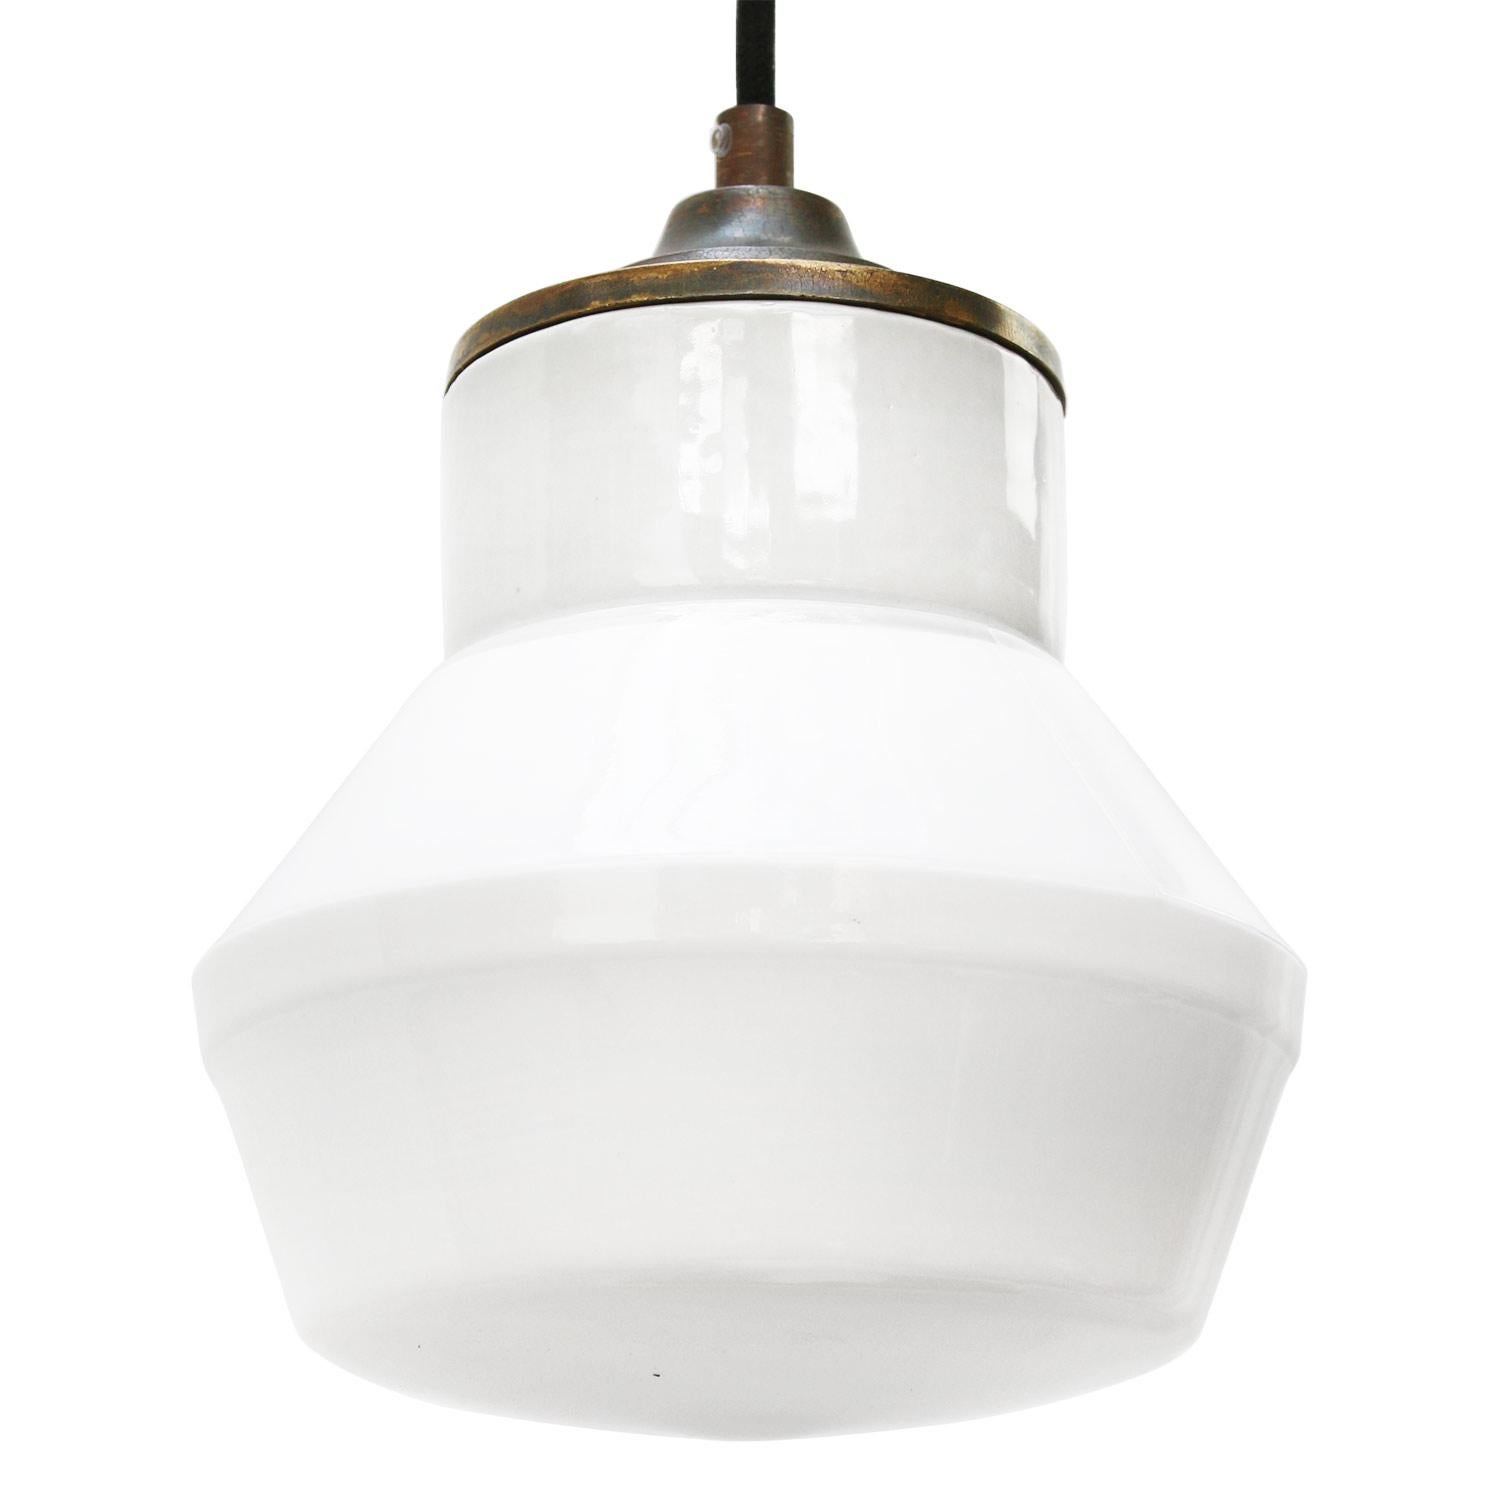 Porcelain Industrial hanging lamp.
White porcelain, brass and opaline glass.
2 conductors, no ground.

Weight: 1.40 kg / 3.1 lb

Priced per individual item. All lamps have been made suitable by international standards for incandescent light